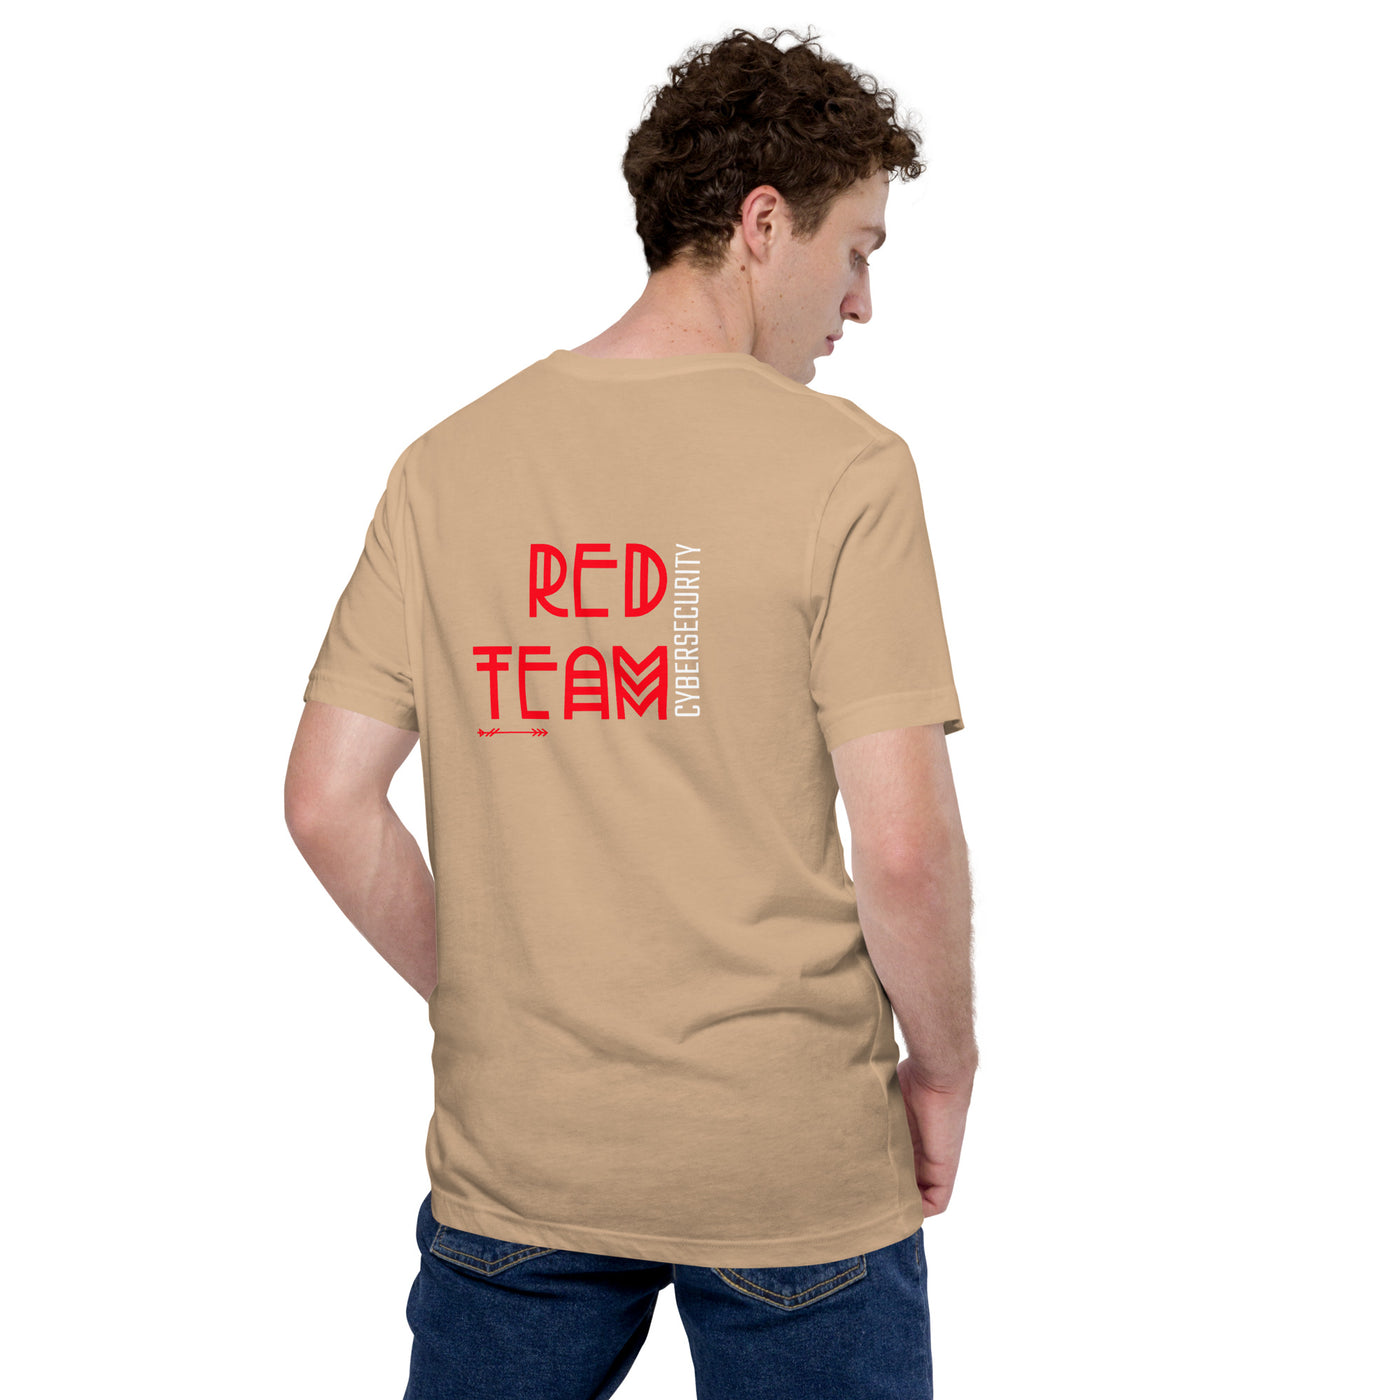 Cyber Security Red Team V5 - Unisex t-shirt ( Back Print )